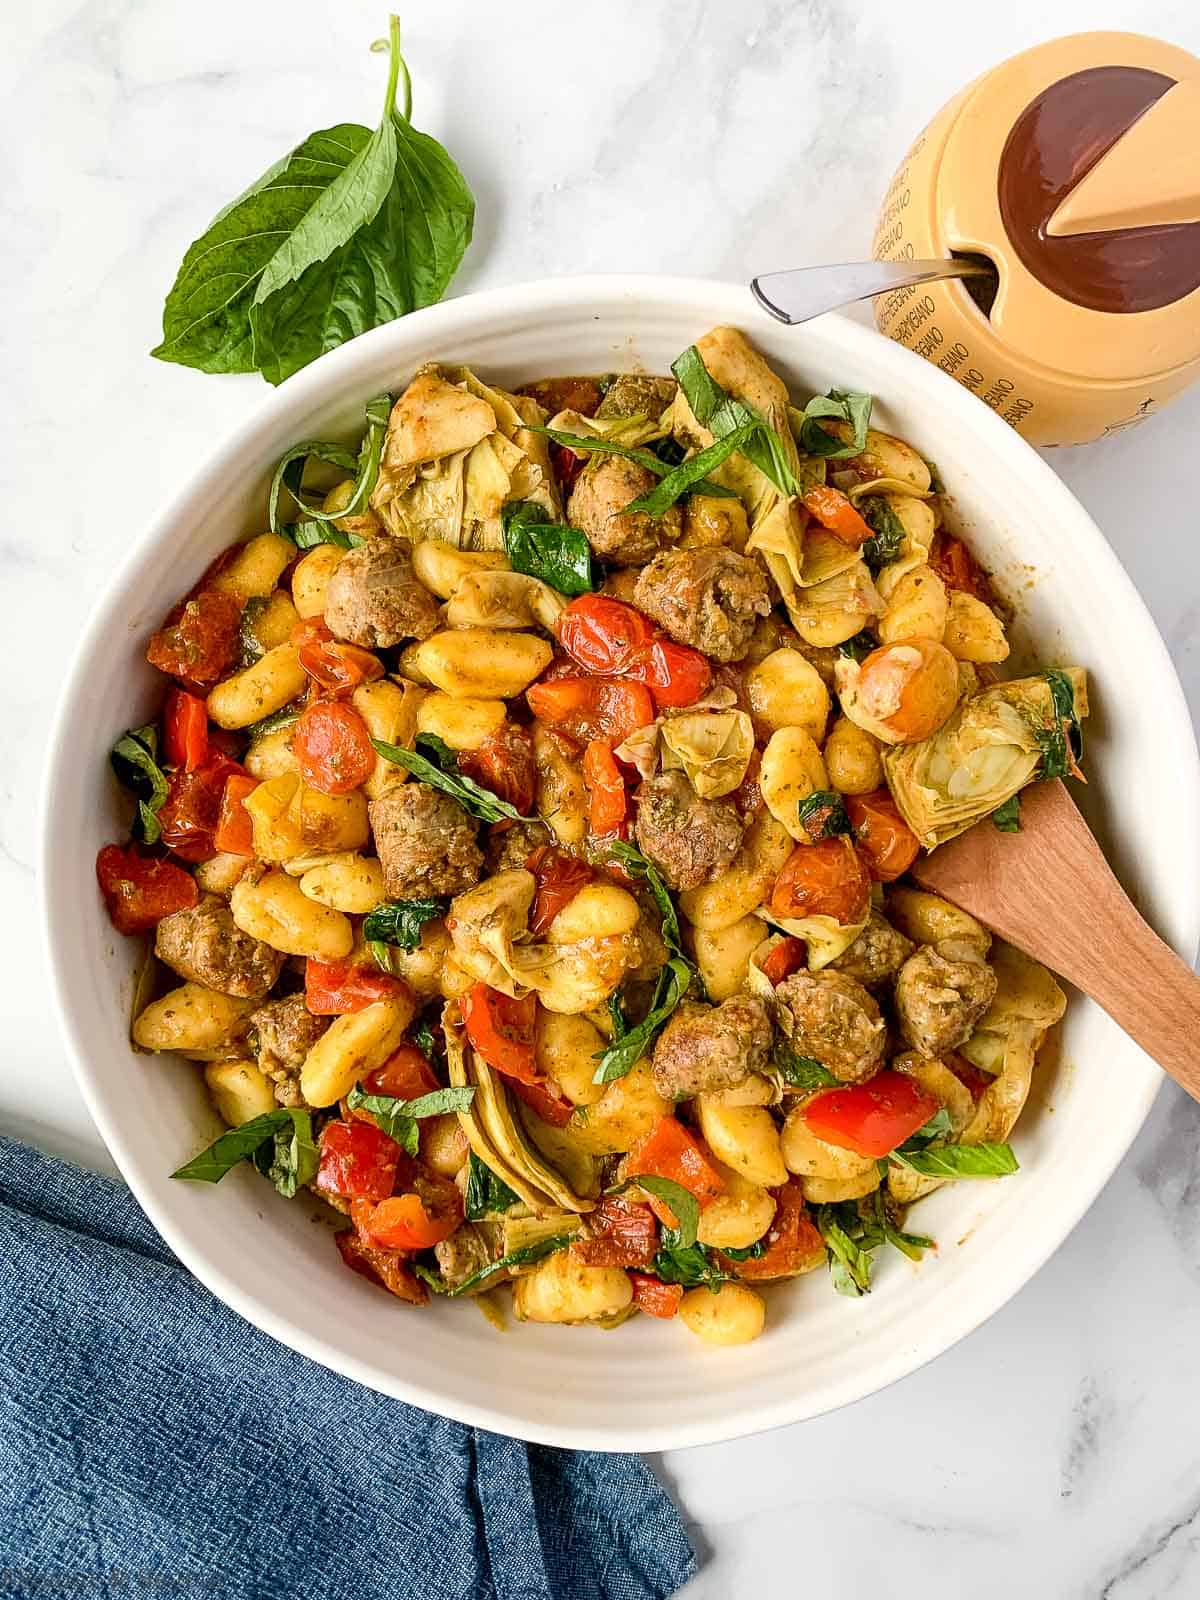 Vegetarian pesto gnocchi in a bowl with a wooden serving spoon.